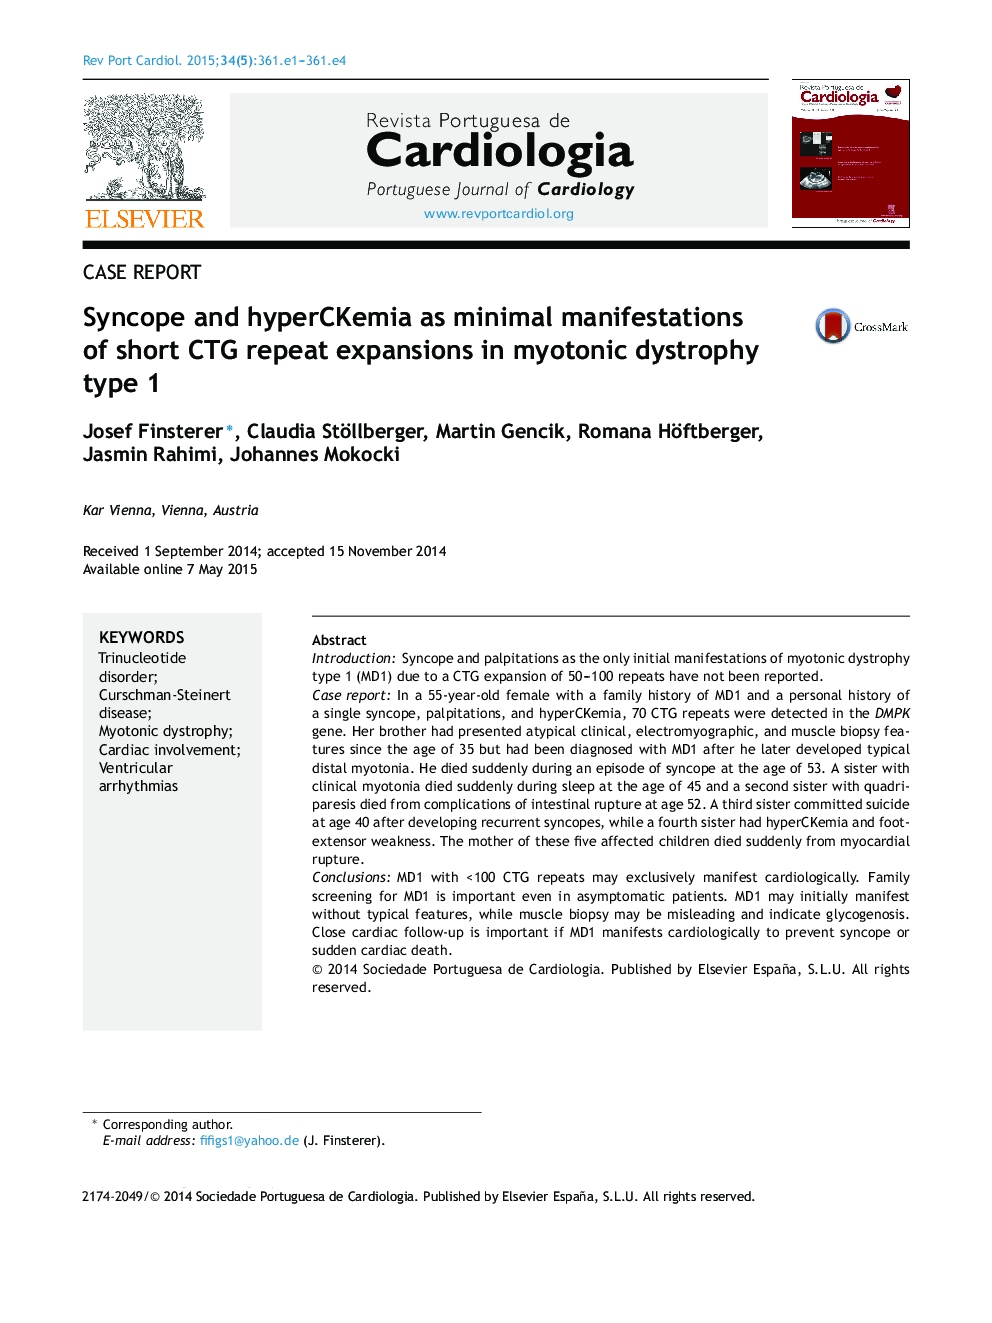 Syncope and hyperCKemia as minimal manifestations of short CTG repeat expansions in myotonic dystrophy type 1